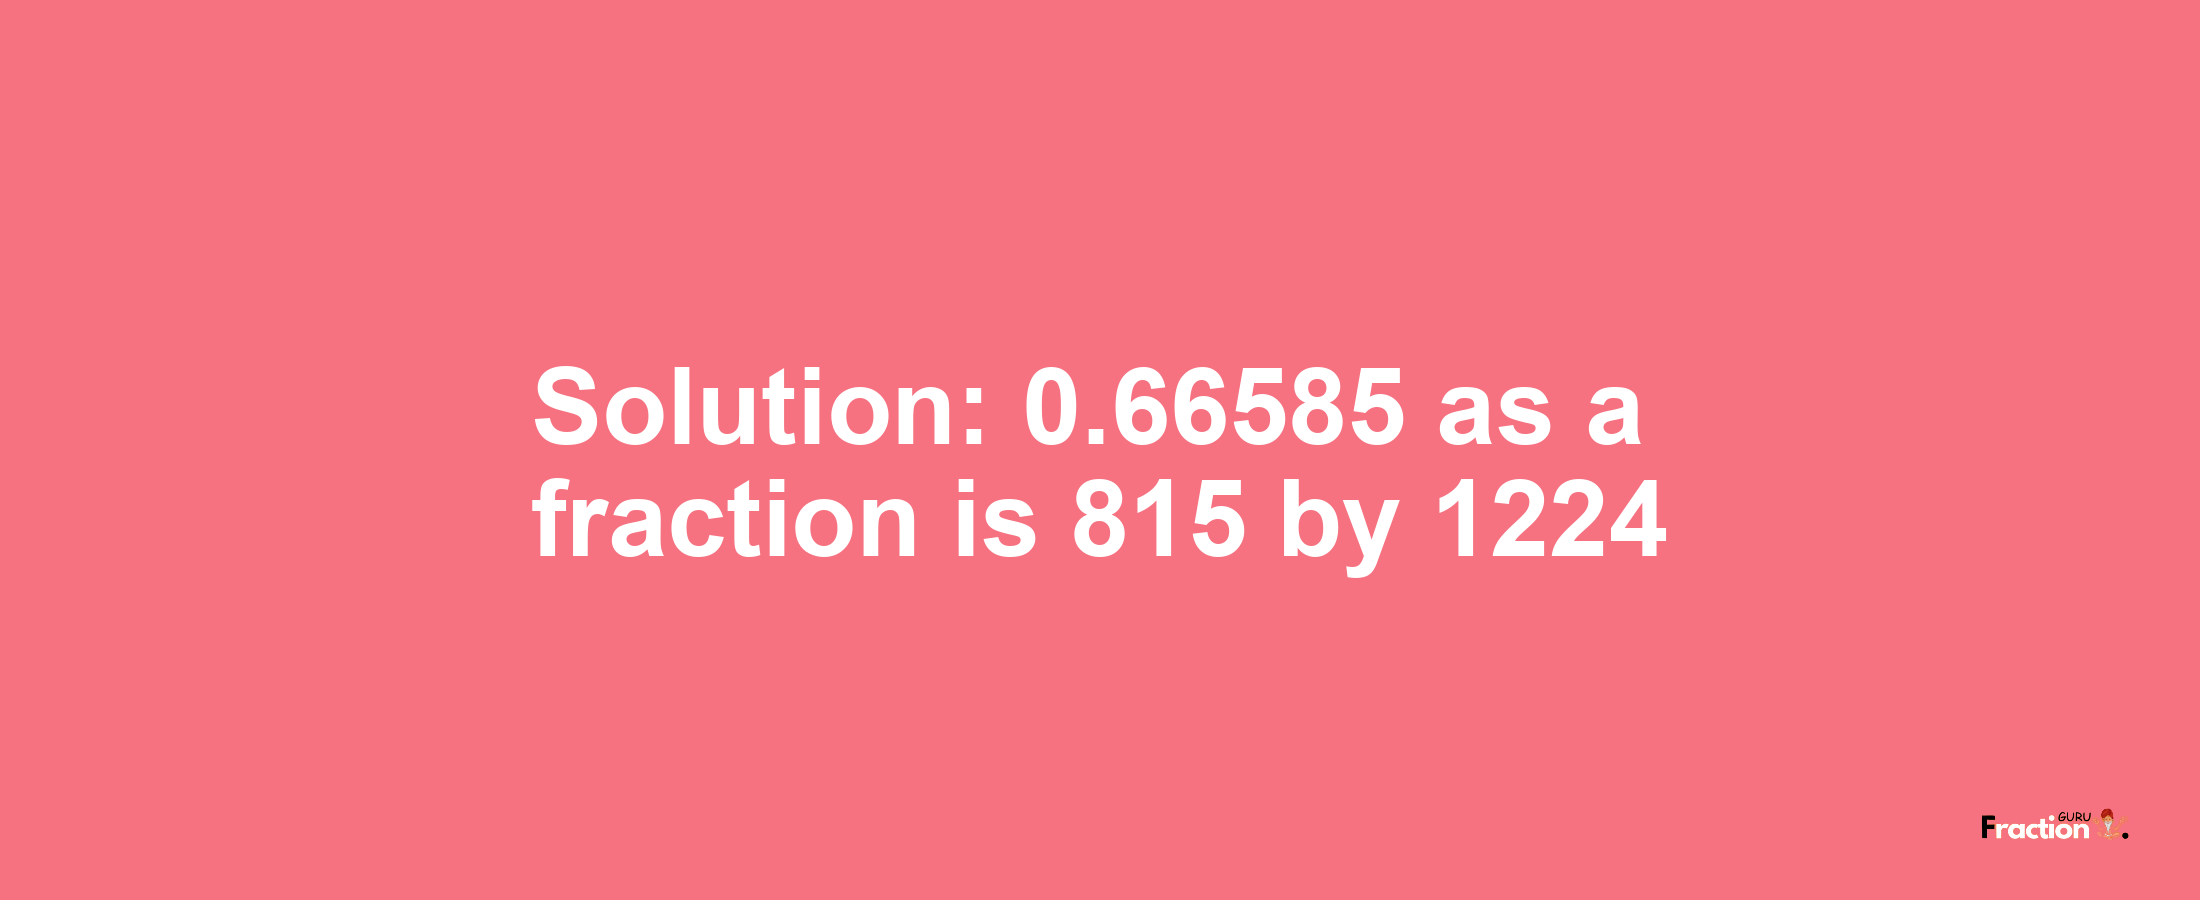 Solution:0.66585 as a fraction is 815/1224